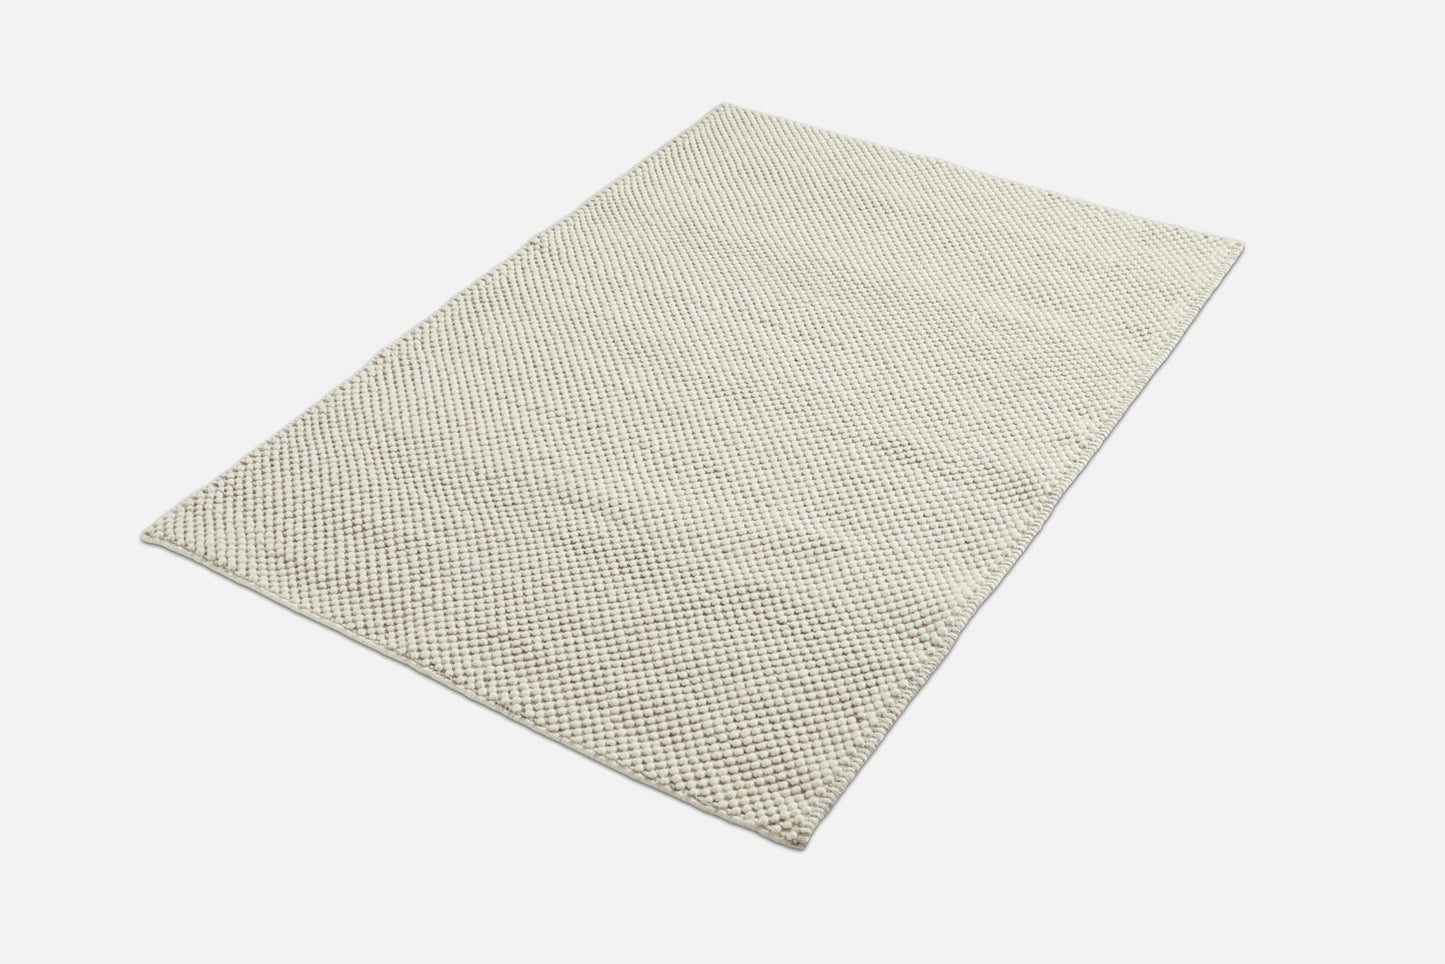 Tact Rug by Woud